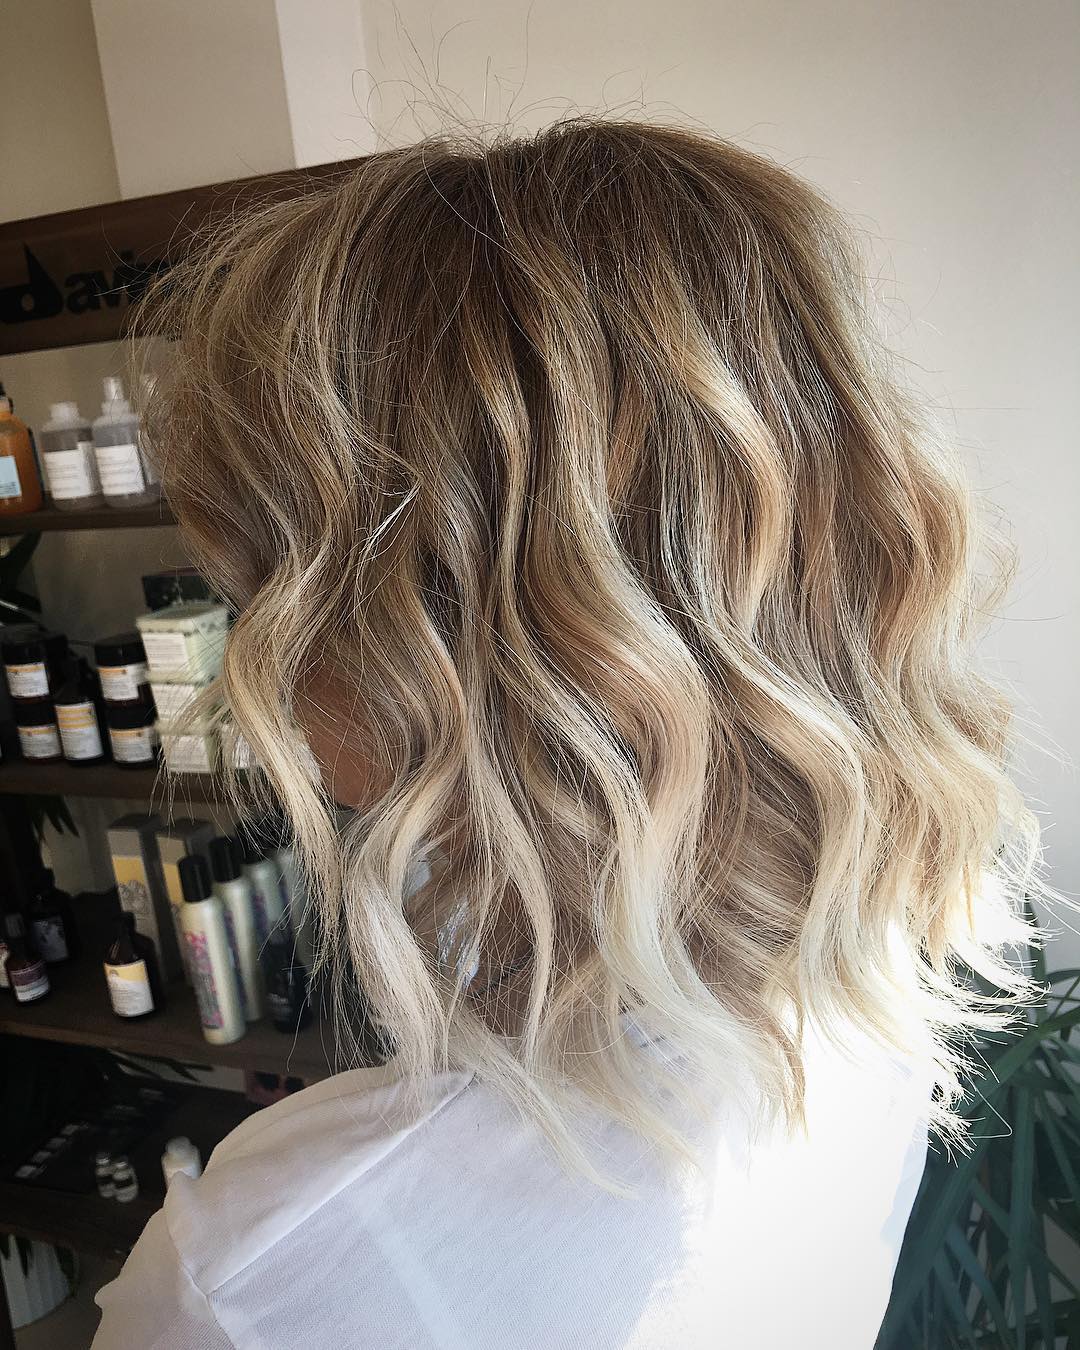 10 Blonde, Brown & Caramel Balayage Hair Color Ideas You Shouldn't Miss